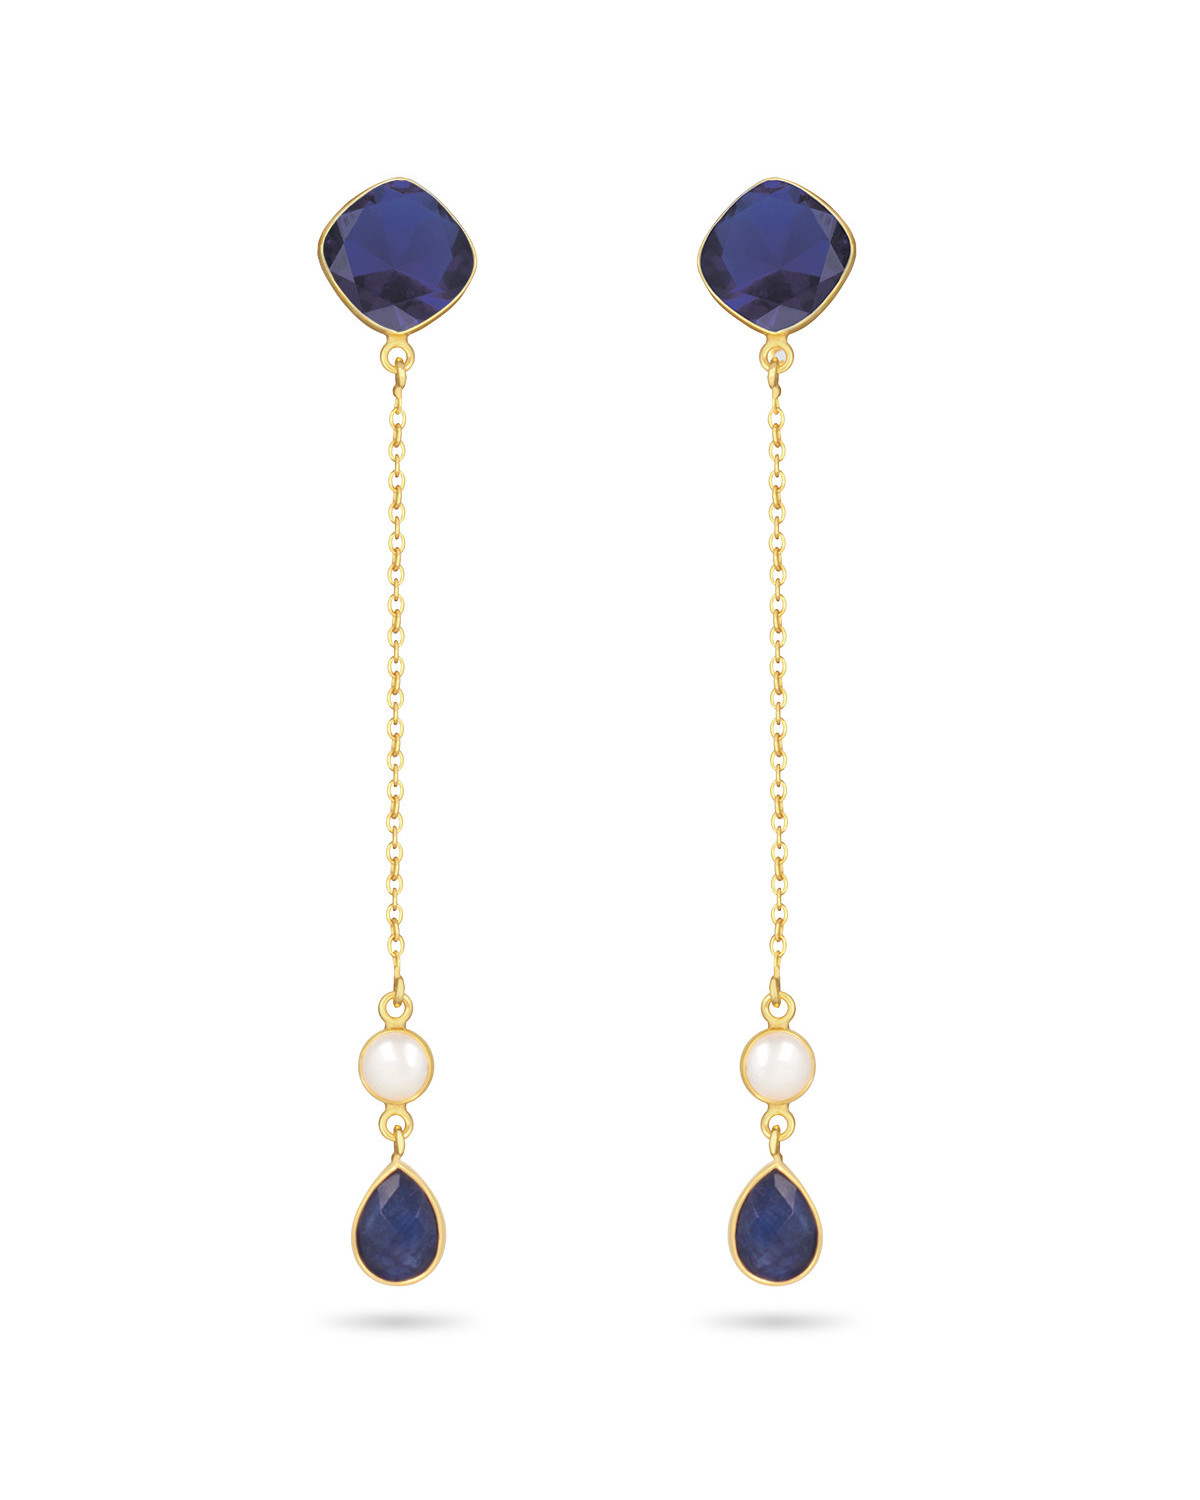 Gold Plated 925 Sterling Silver Sapphire Earrings